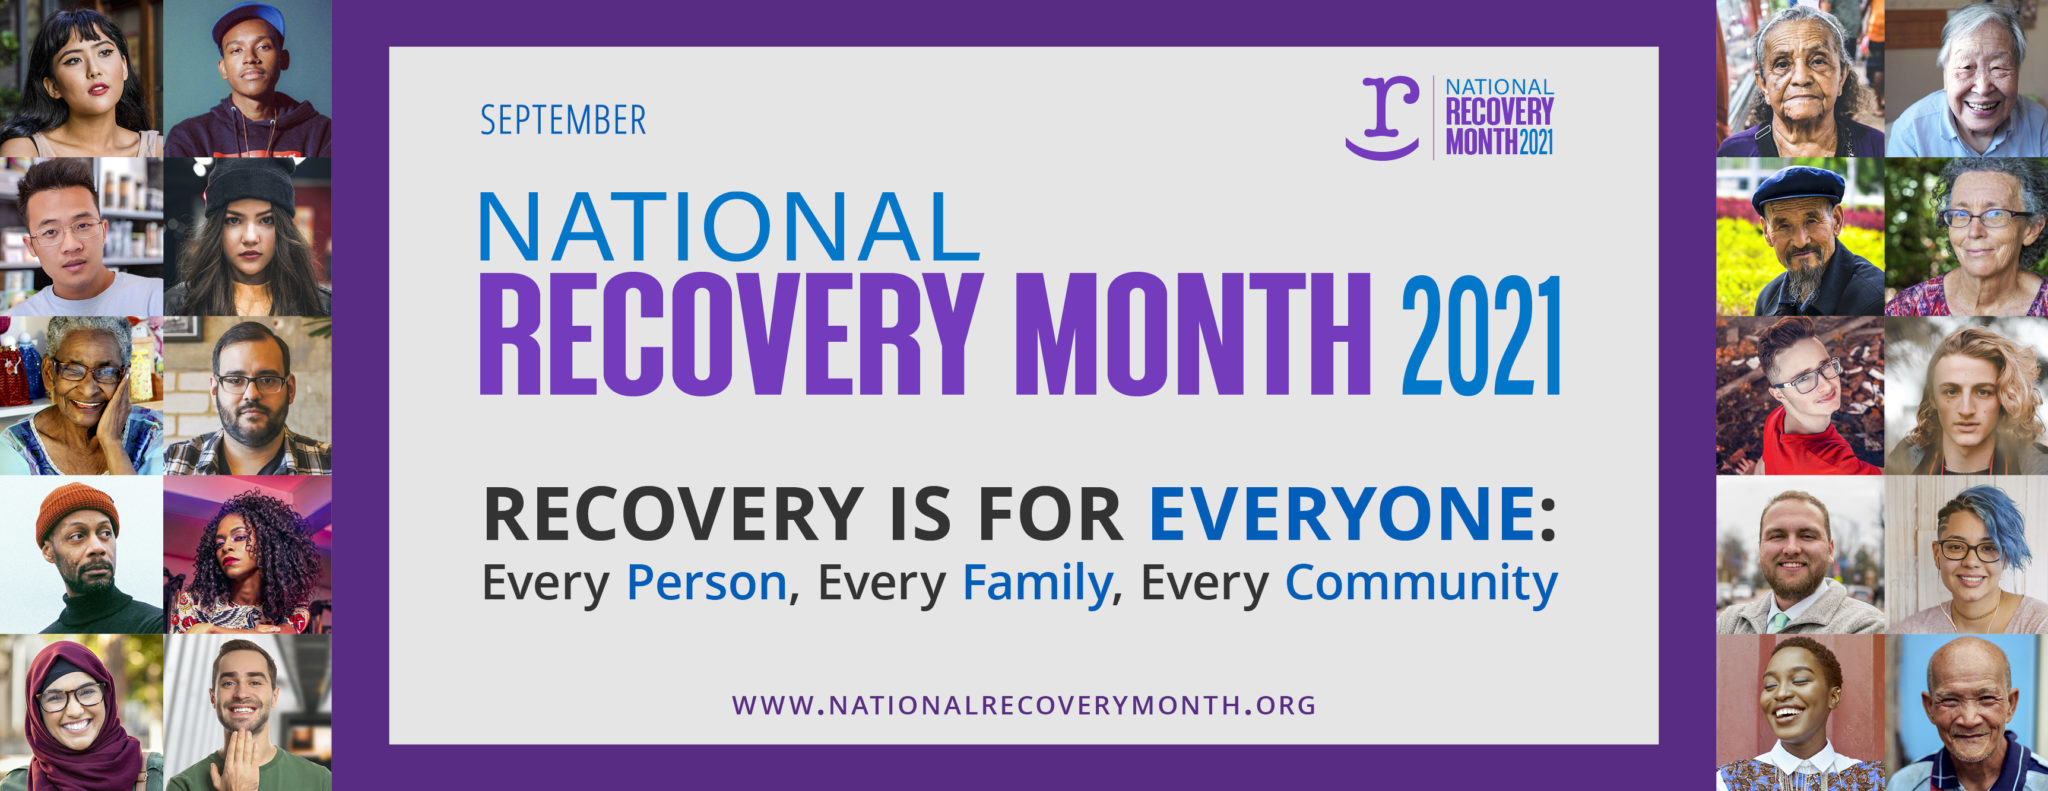 Recovery Month Banner 2021